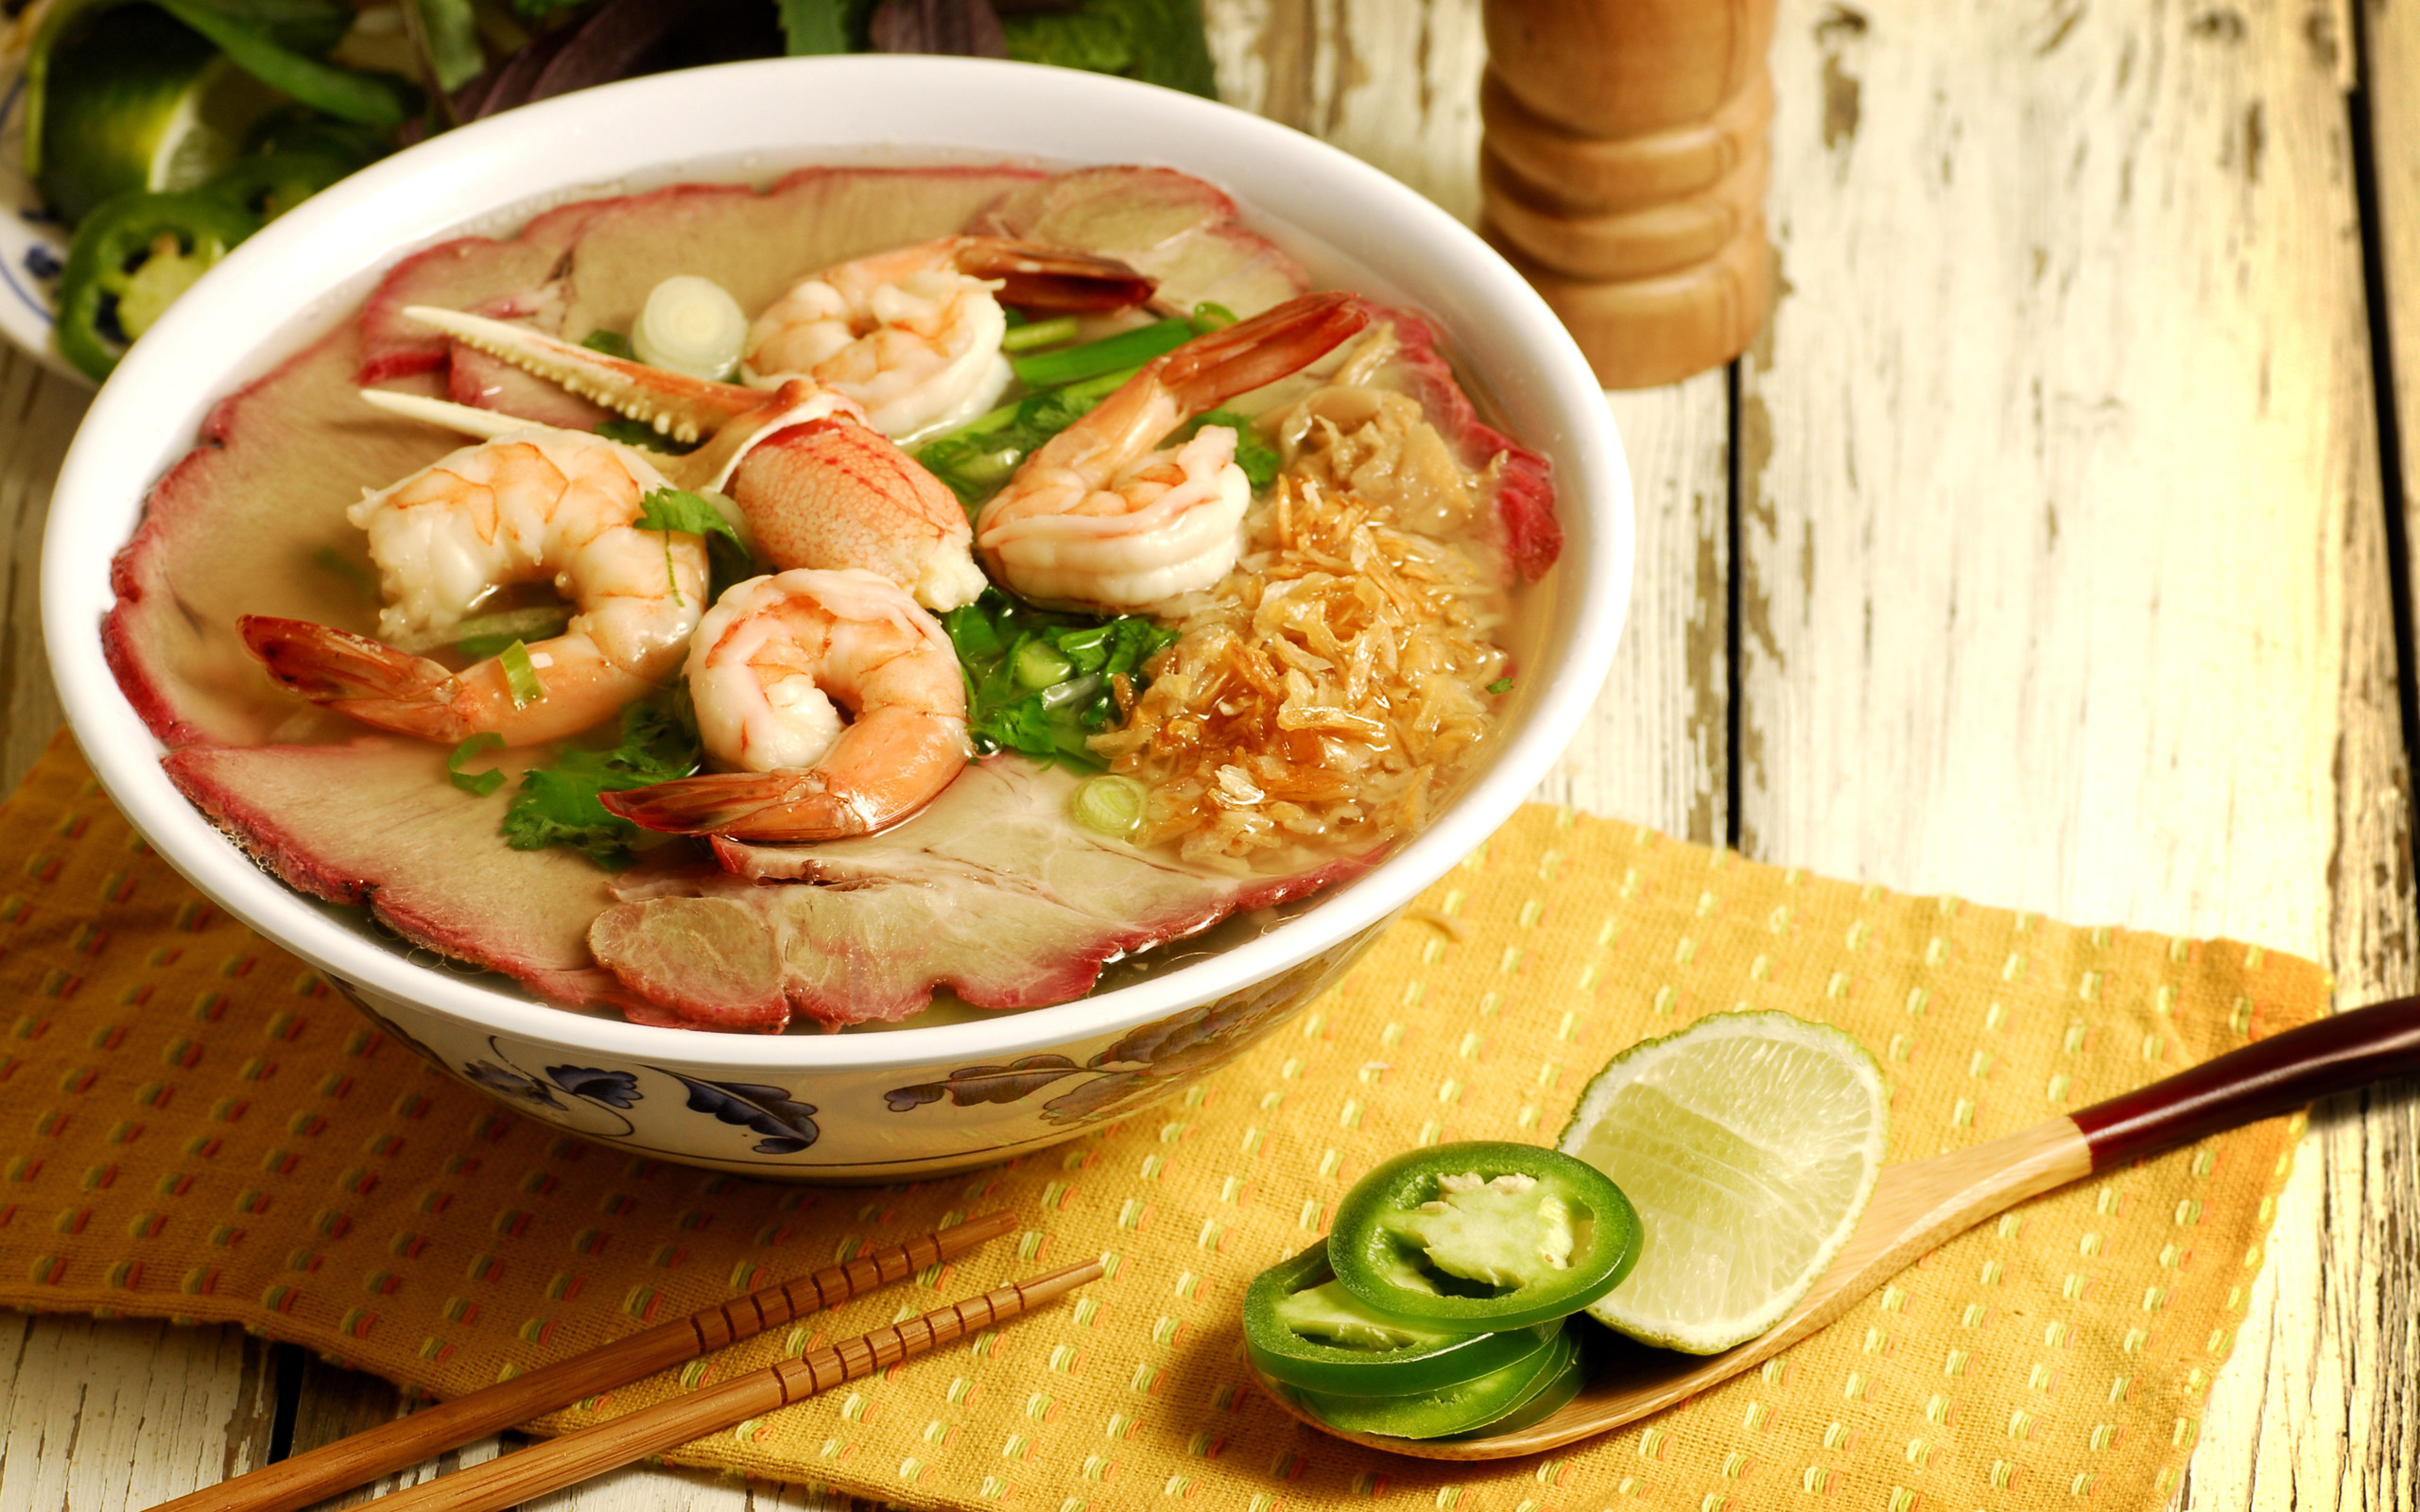 2560x1600 A bowl of soup with shrimps and seafood on the table wallpapers and images  - wallpapers, pictures, photos